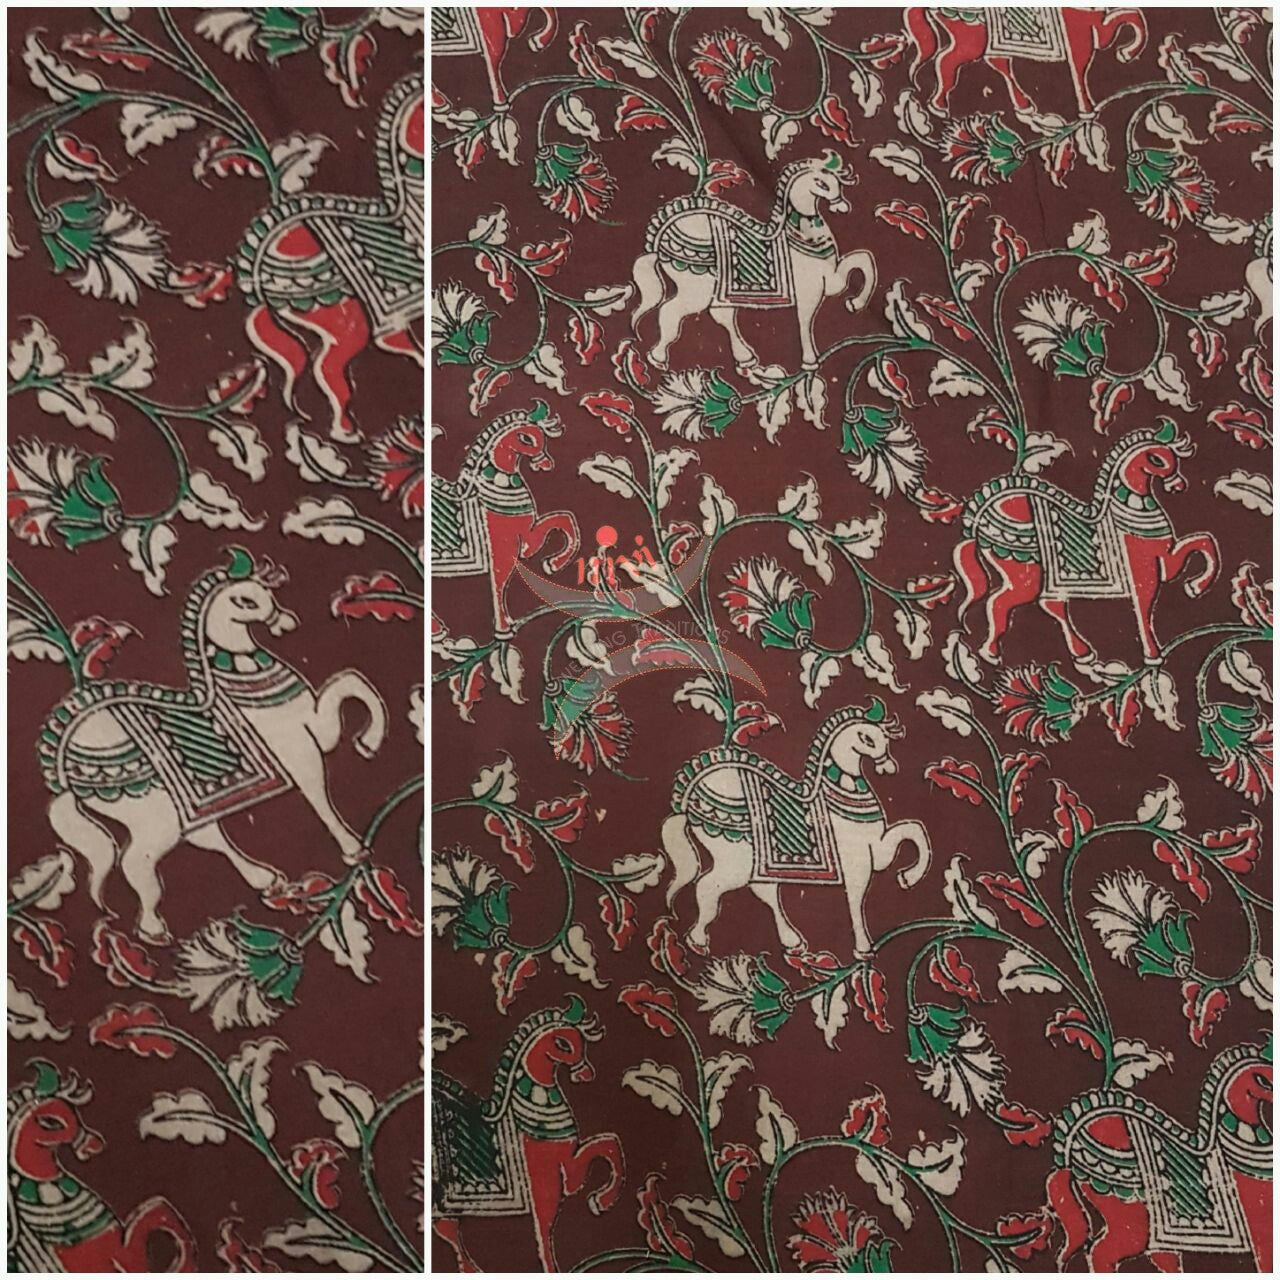 Maroon handwoven cotton kalamkari material with traditional horse and floral motifs.